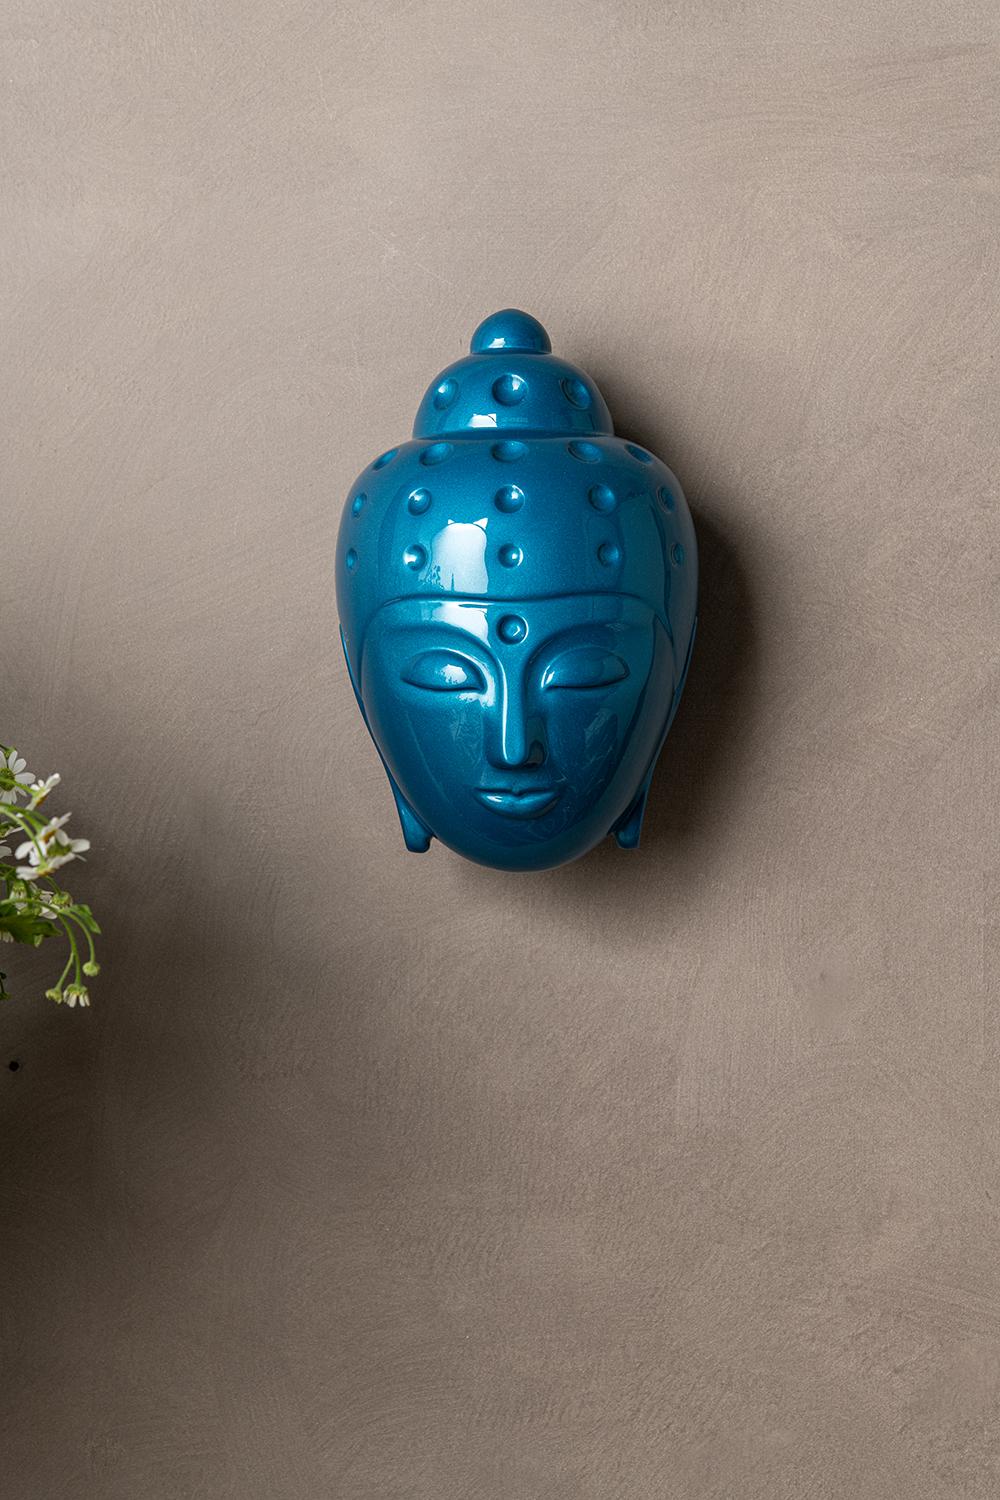 Contemporary buddha head sculpture - painted in turquoise car paint